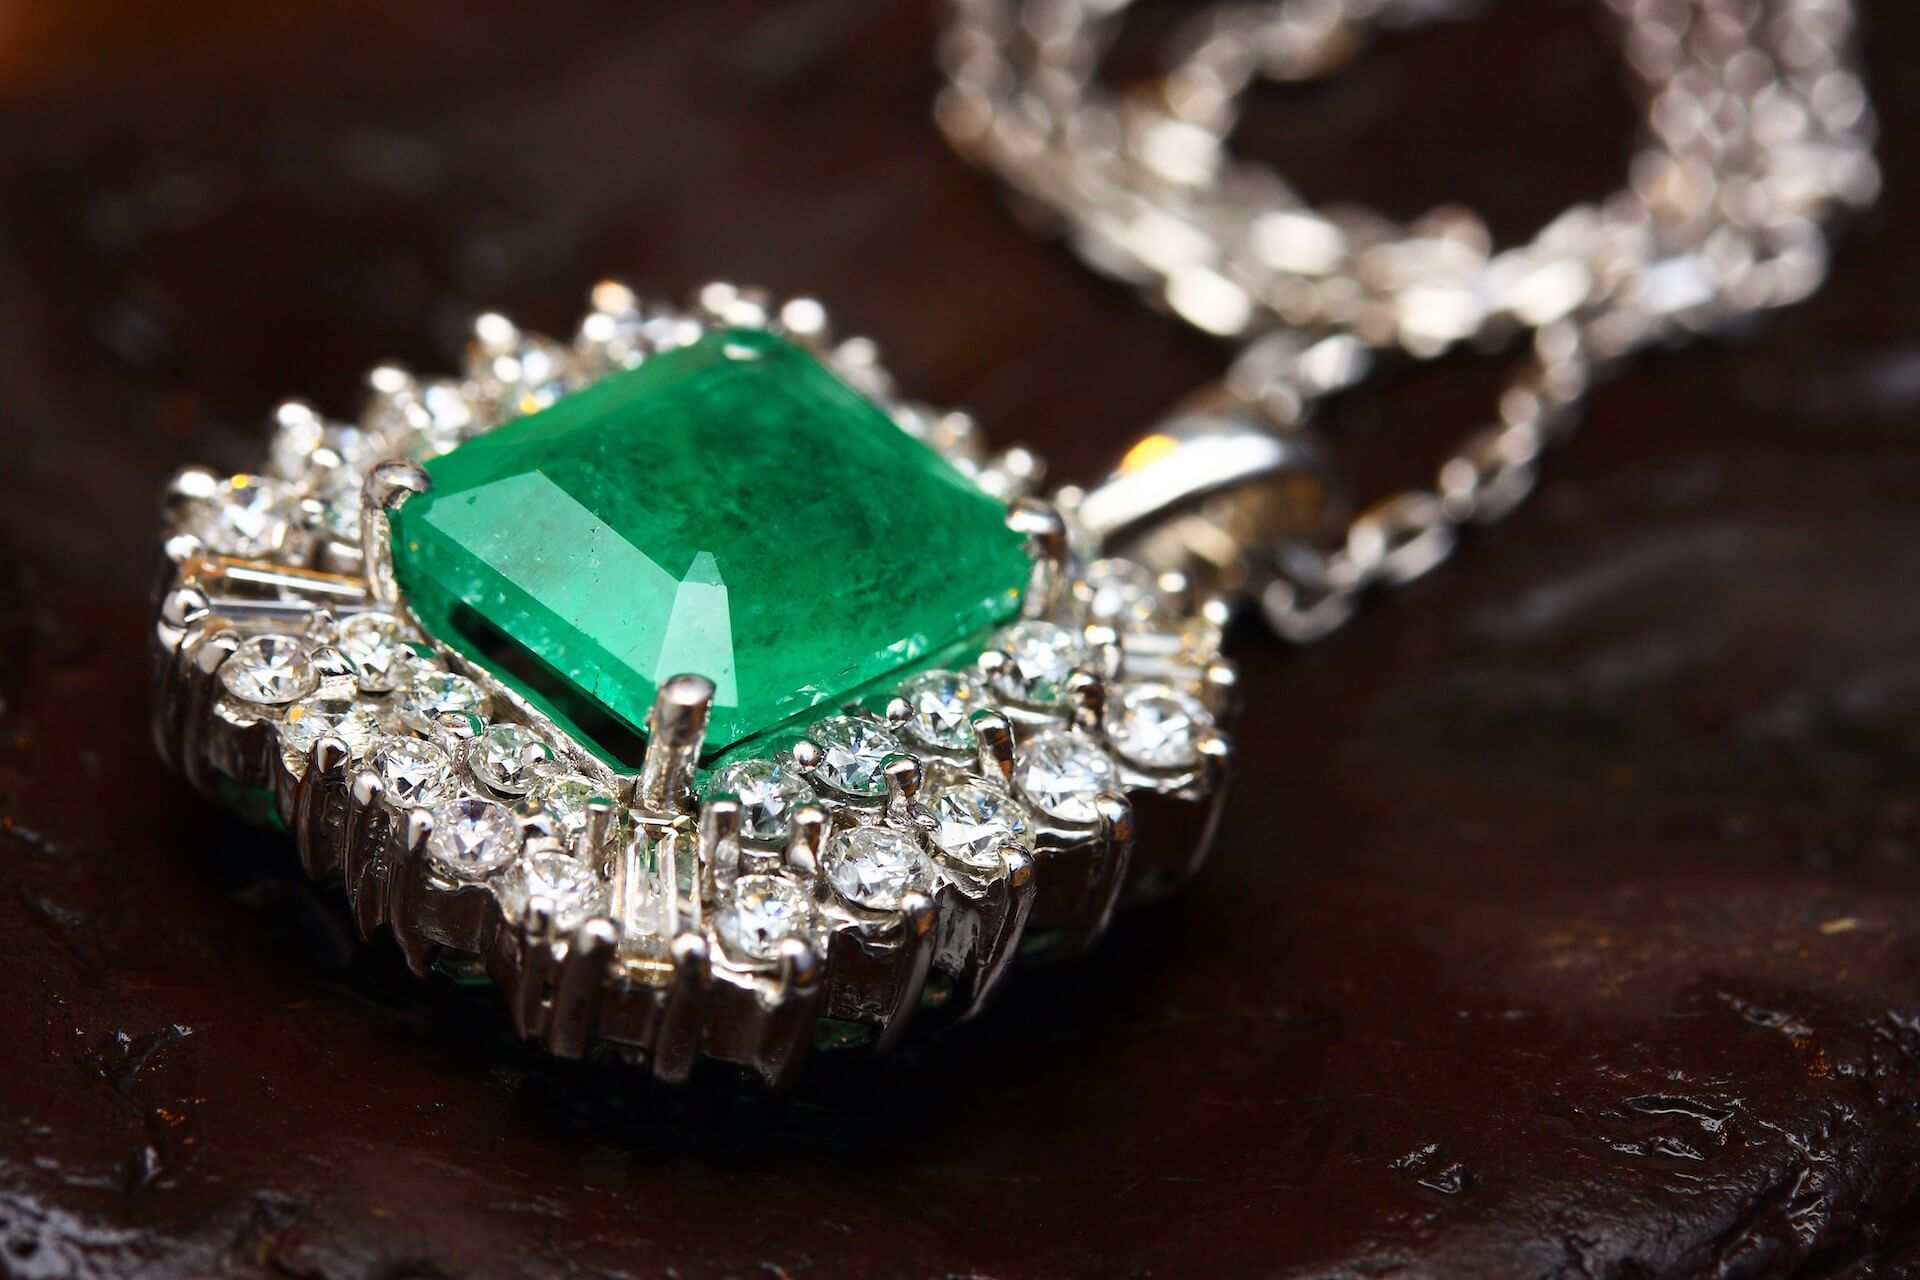 A necklace with a green gemstone